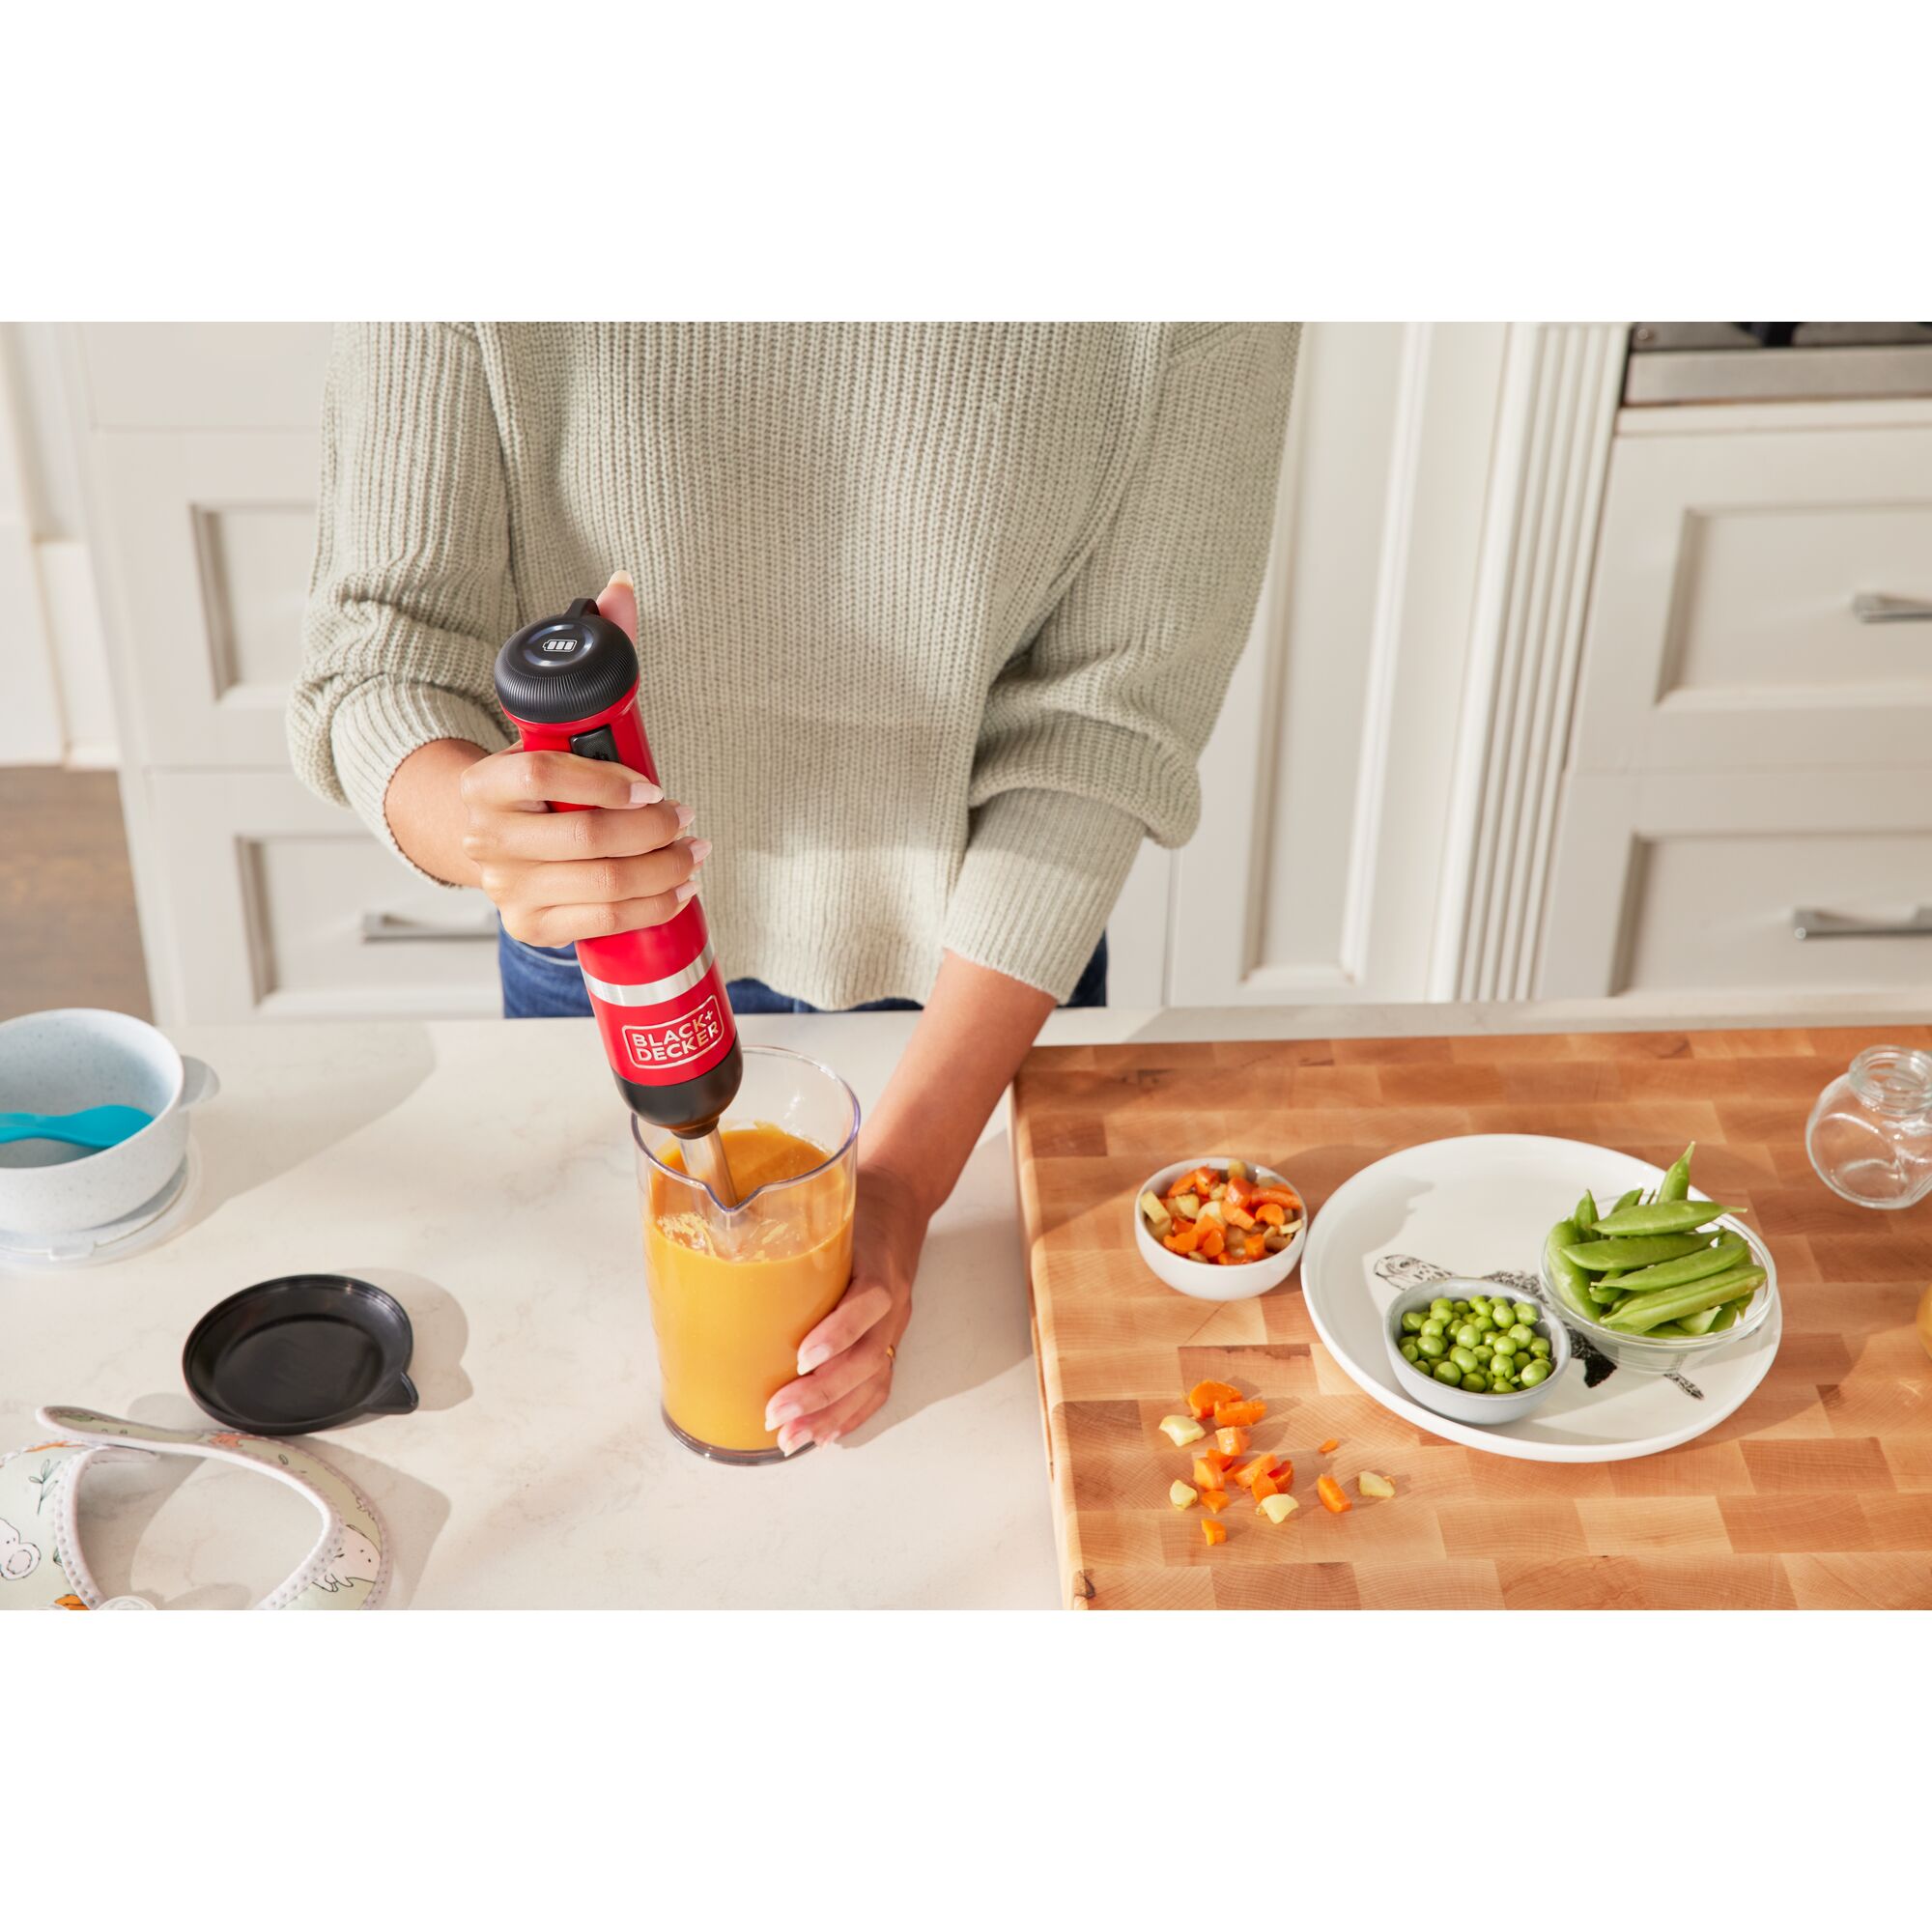 Talent using the red, BLACK+DECKER kitchen wand immersion blender to prepare baby food